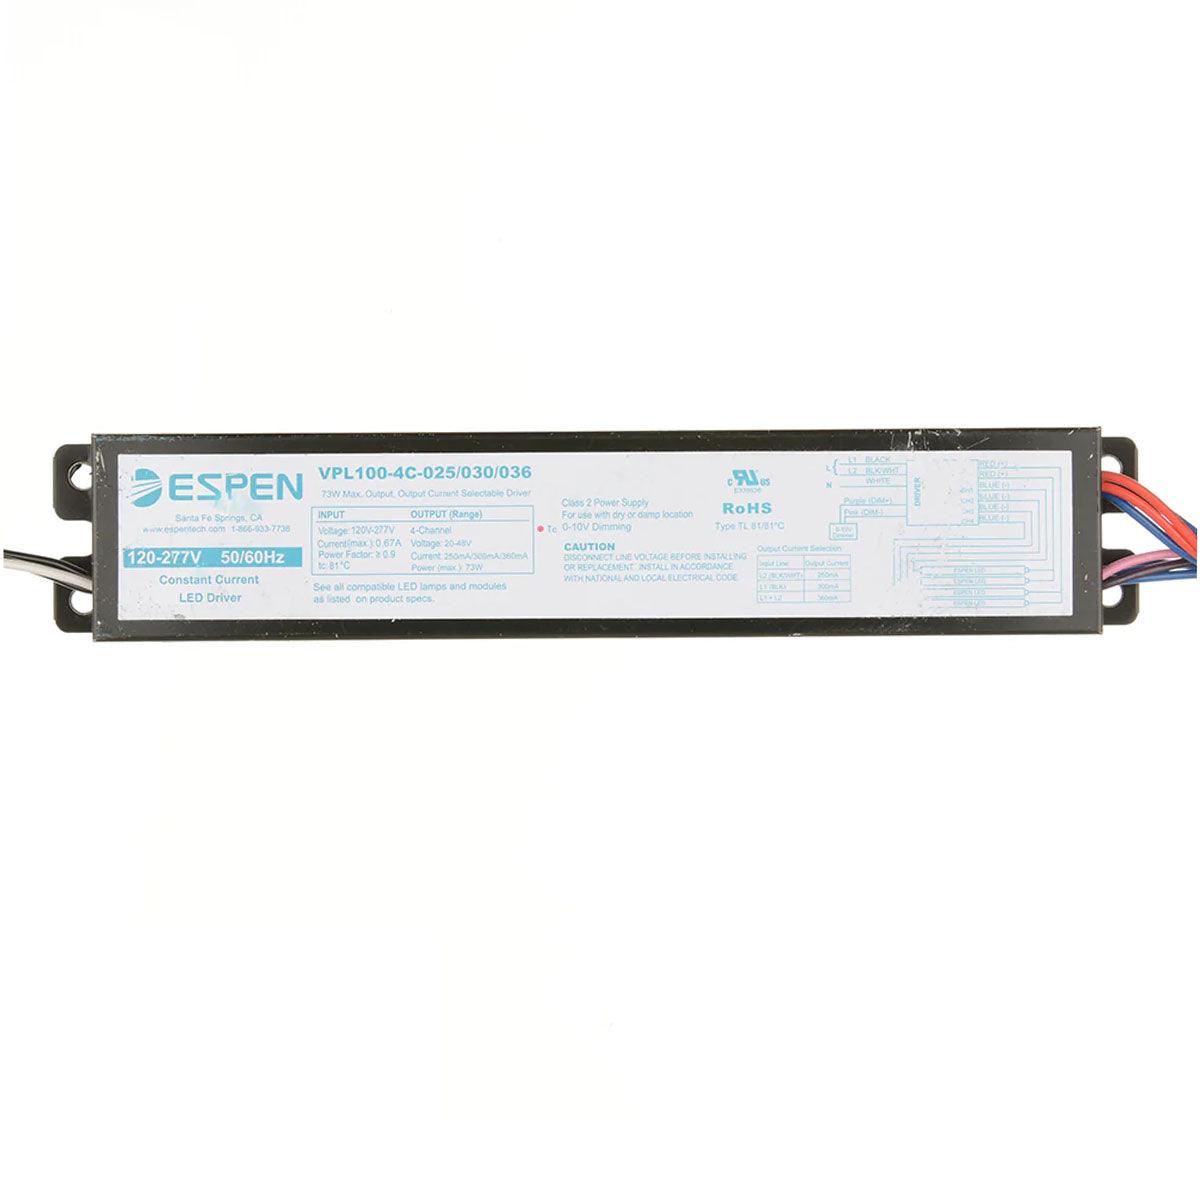 CoreTech VPL LED Driver, 69W, Selectable Constant Current 250-360mA, 0-10V Dimming, 4 Channels, 120-277V Input